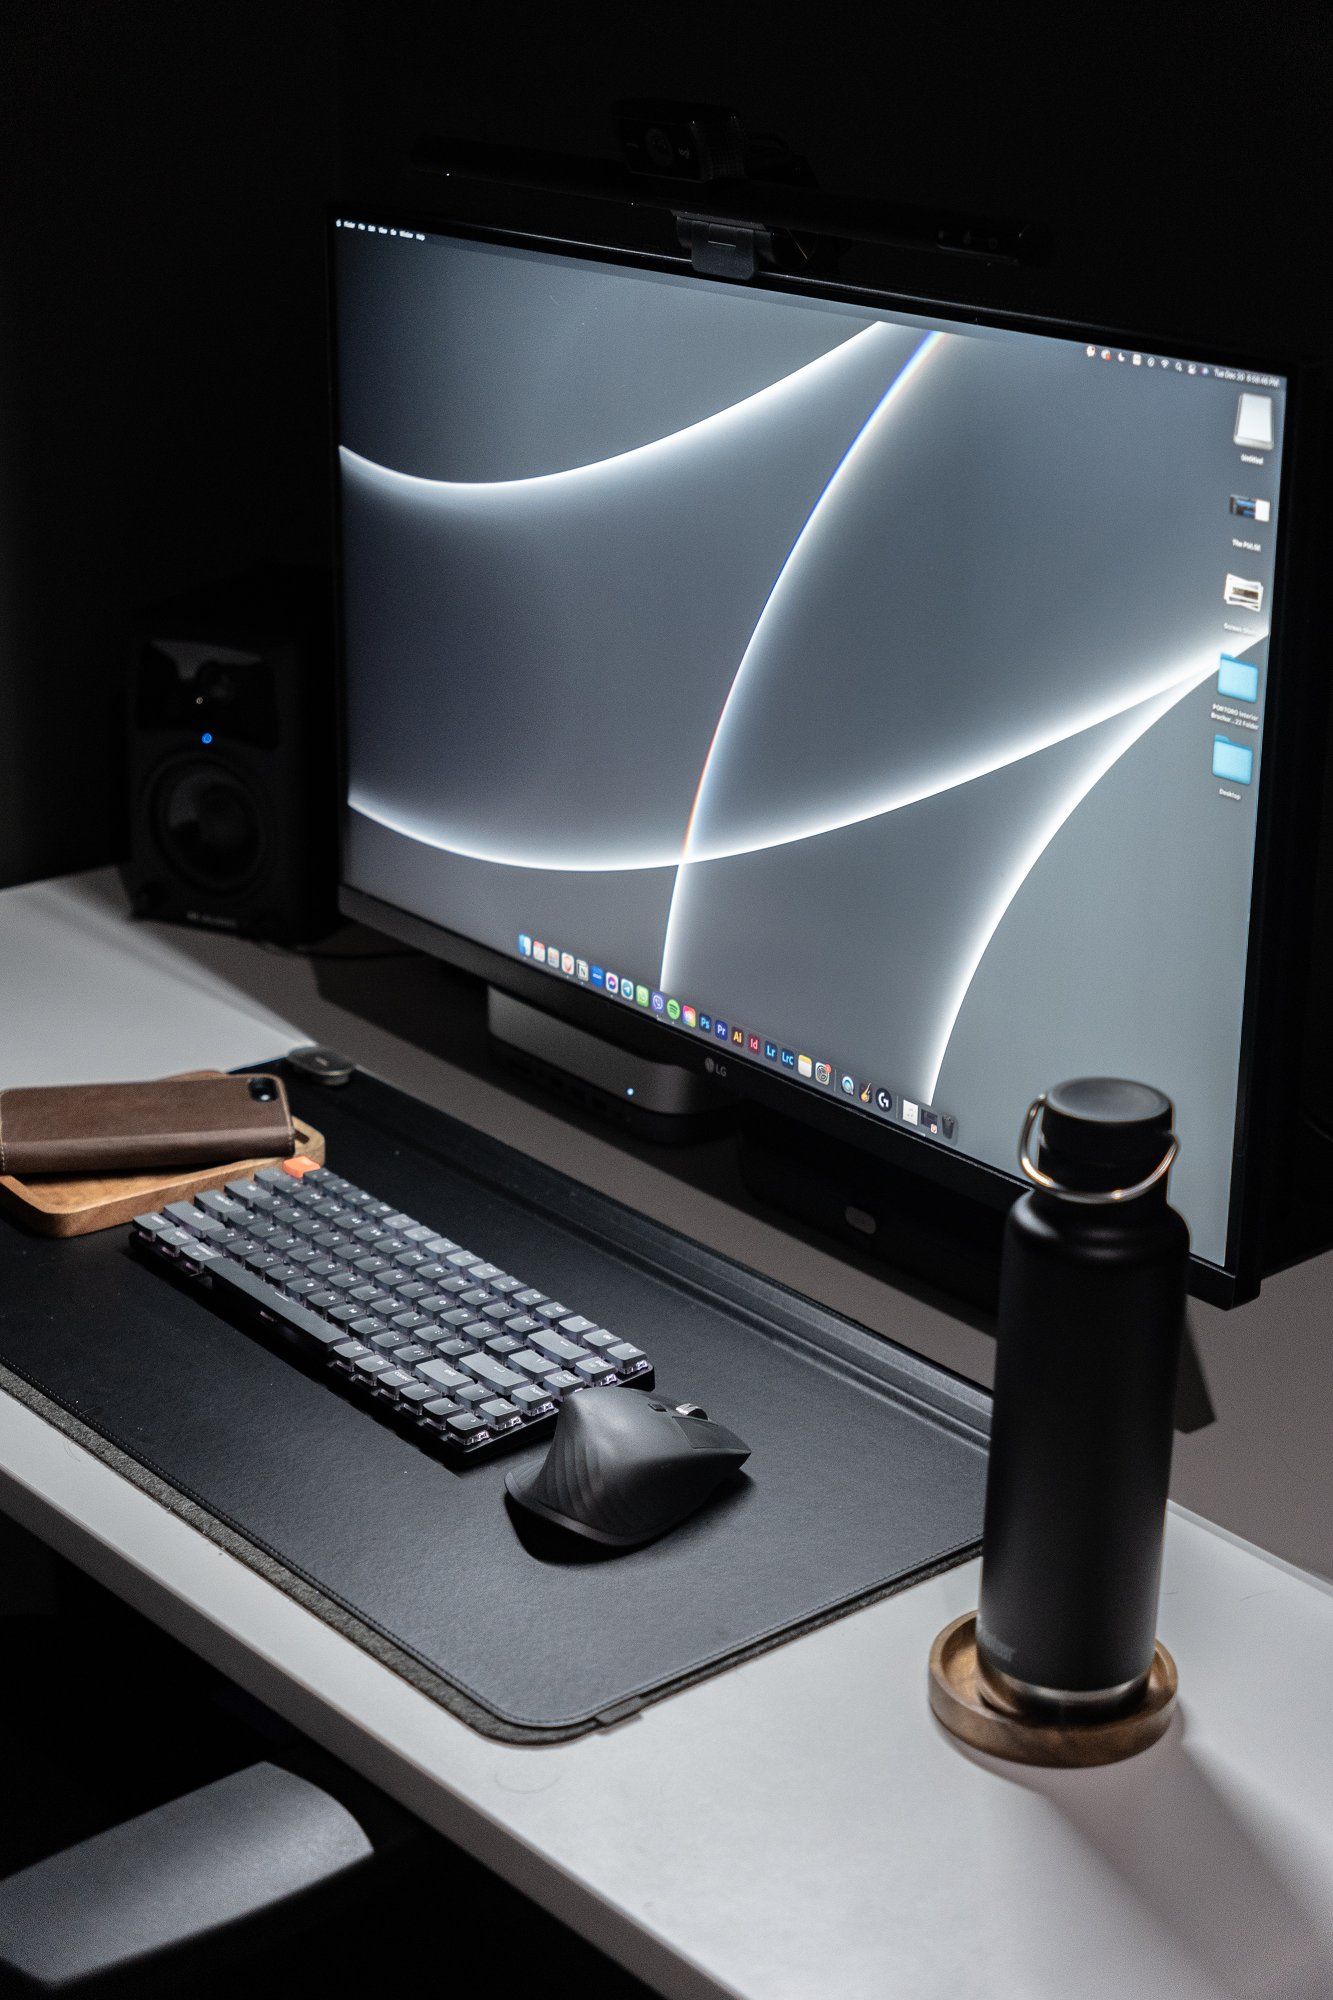 Emmie’s dark and moody home office desk setup features an LG monitor, the Keychron K3 mechanical keyboard, the Logitech MX Master 3 mouse, and a reusable water bottle